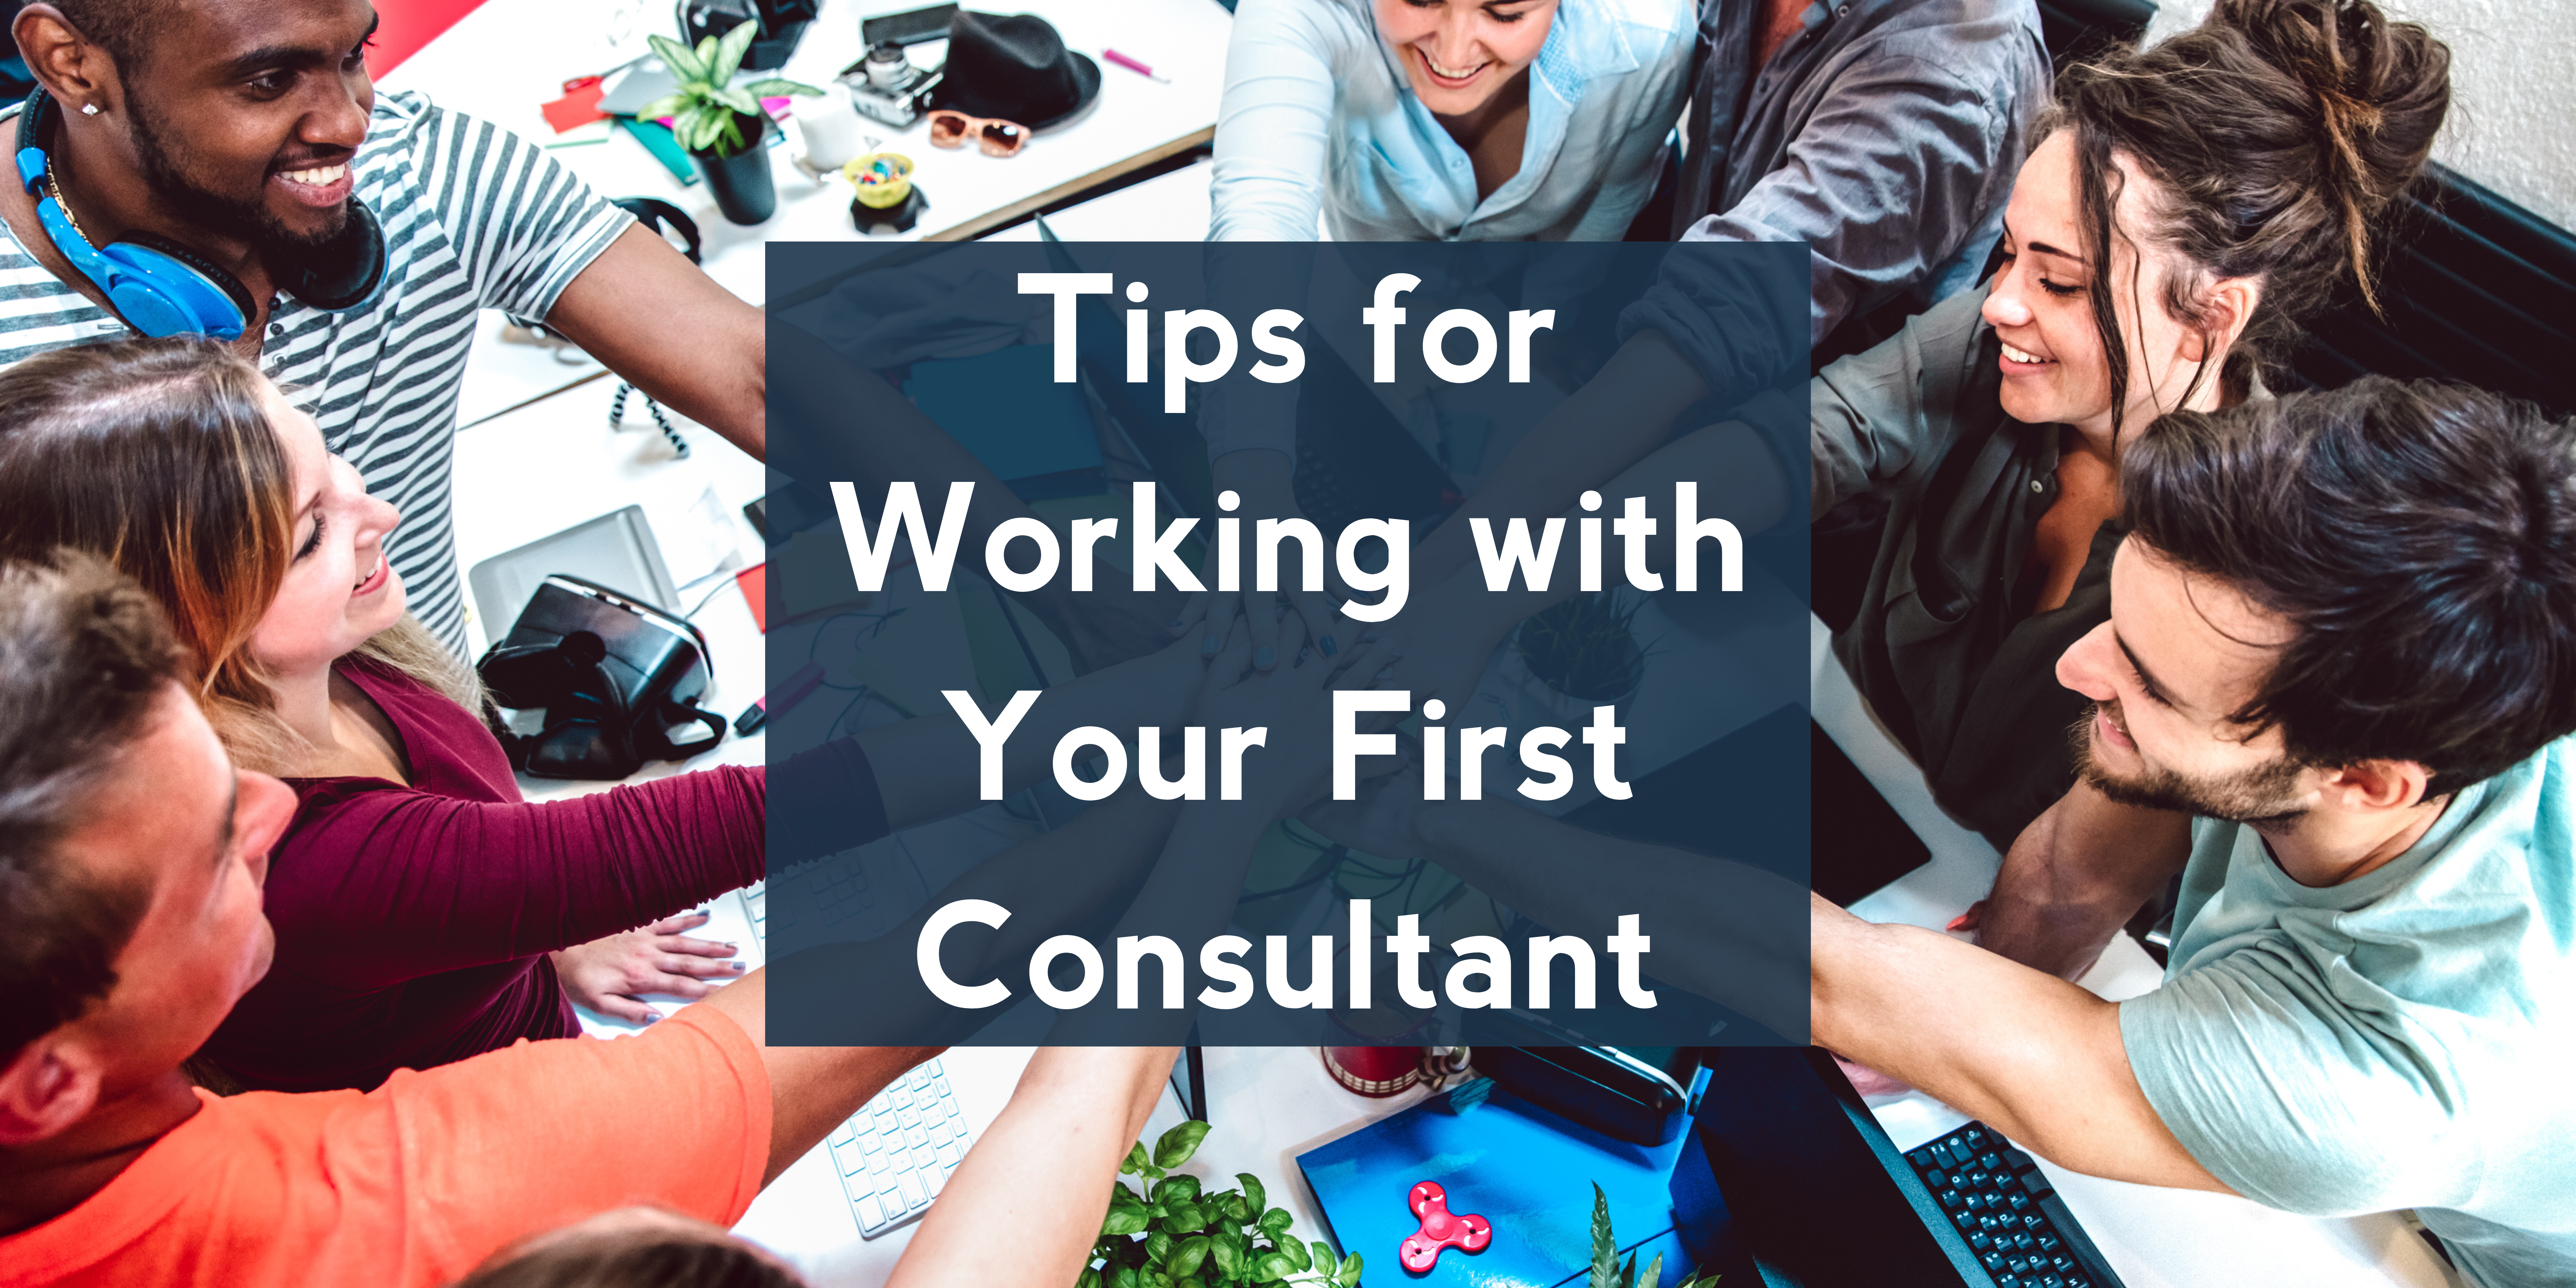 Tips for Working with Your First Consultant